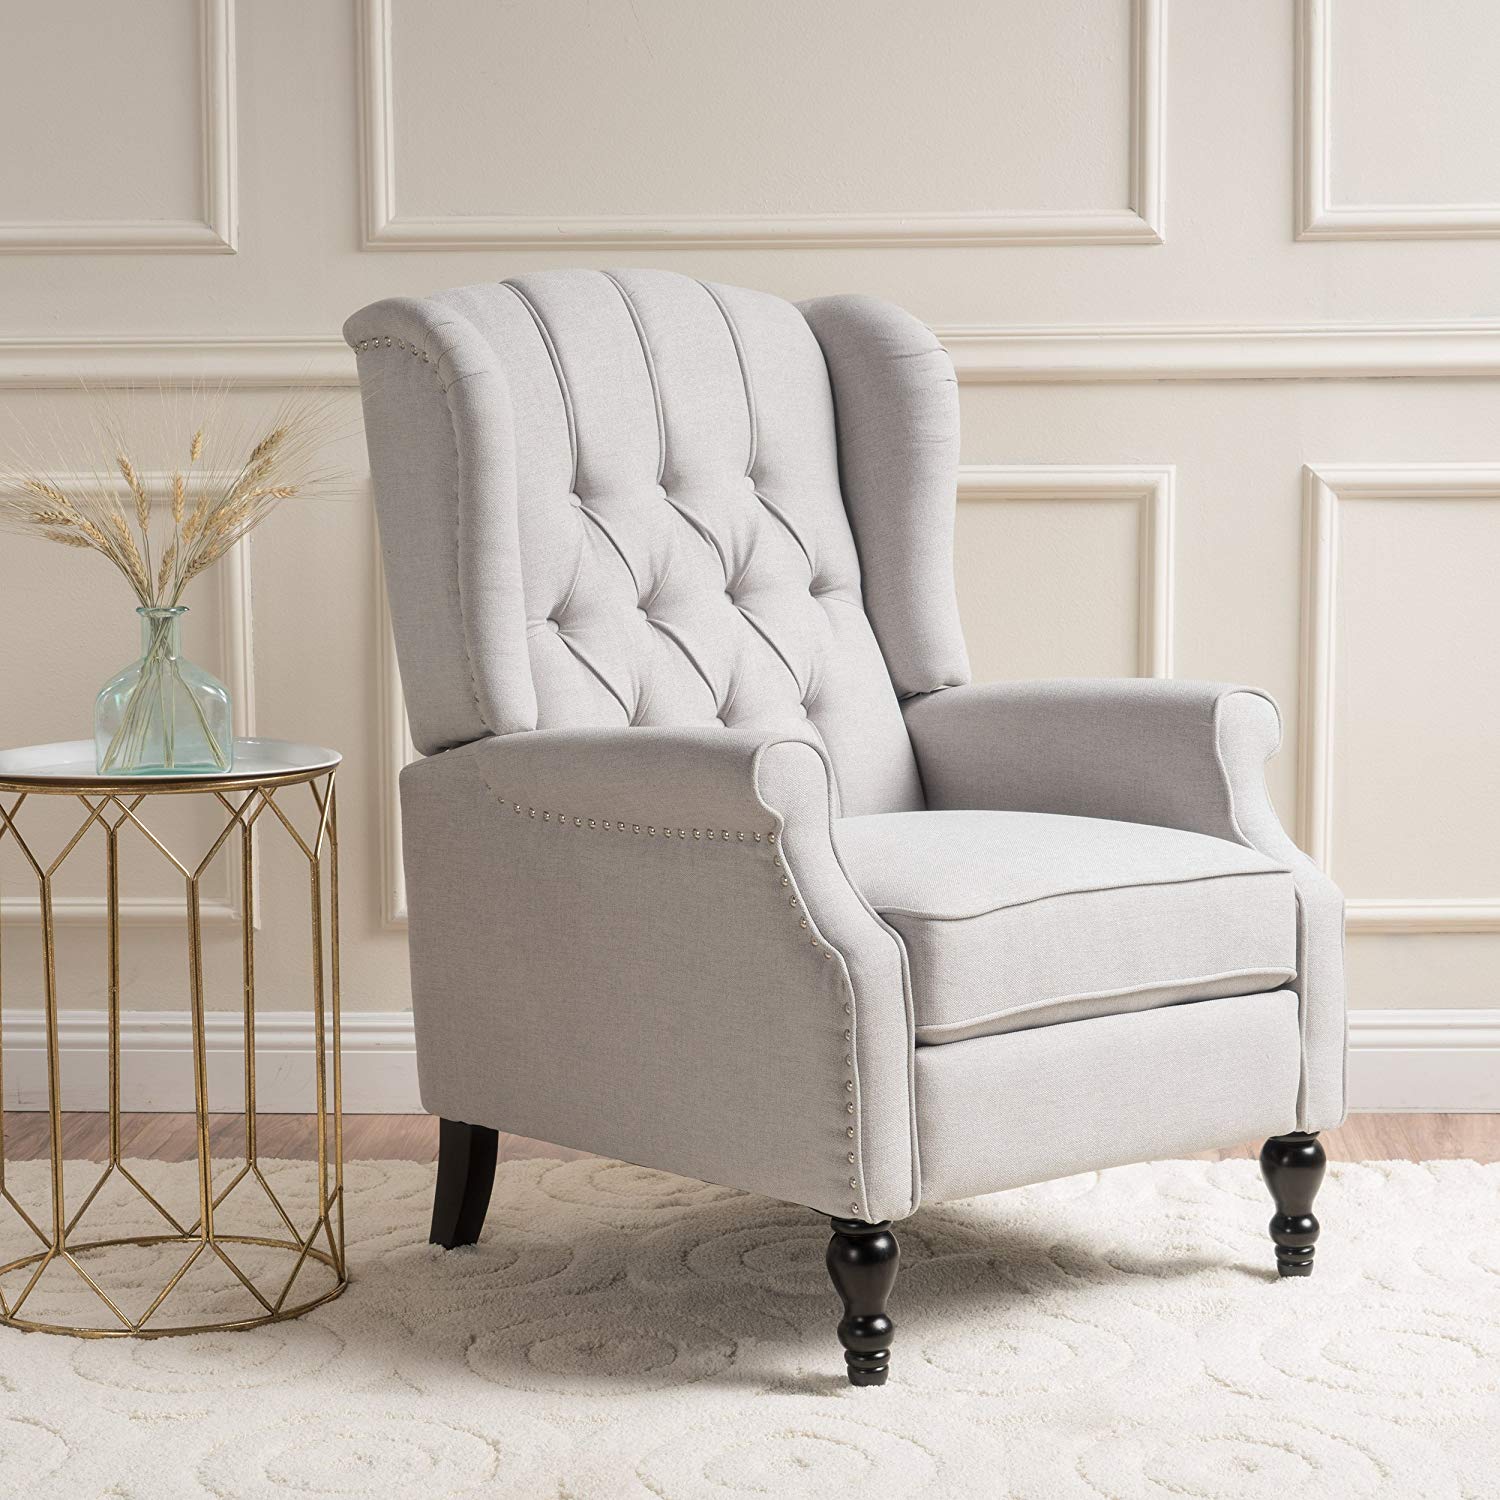 Christopher Knight Home Elizabeth Tufted Fabric Arm Chair